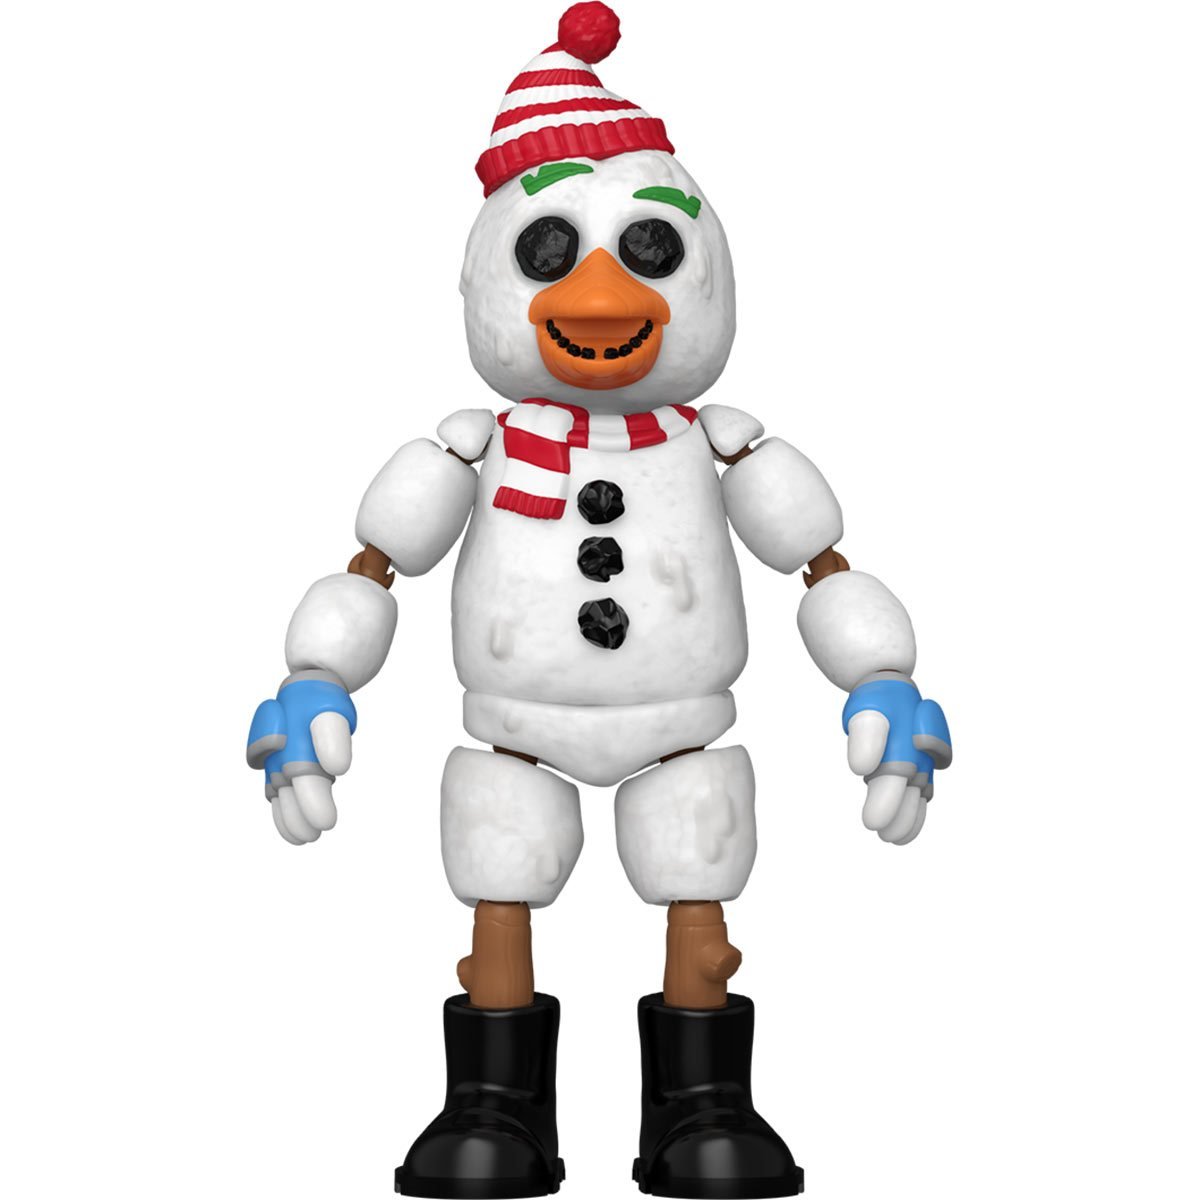 Funko Plush: Five Nights at Freddy's - Holiday Chica